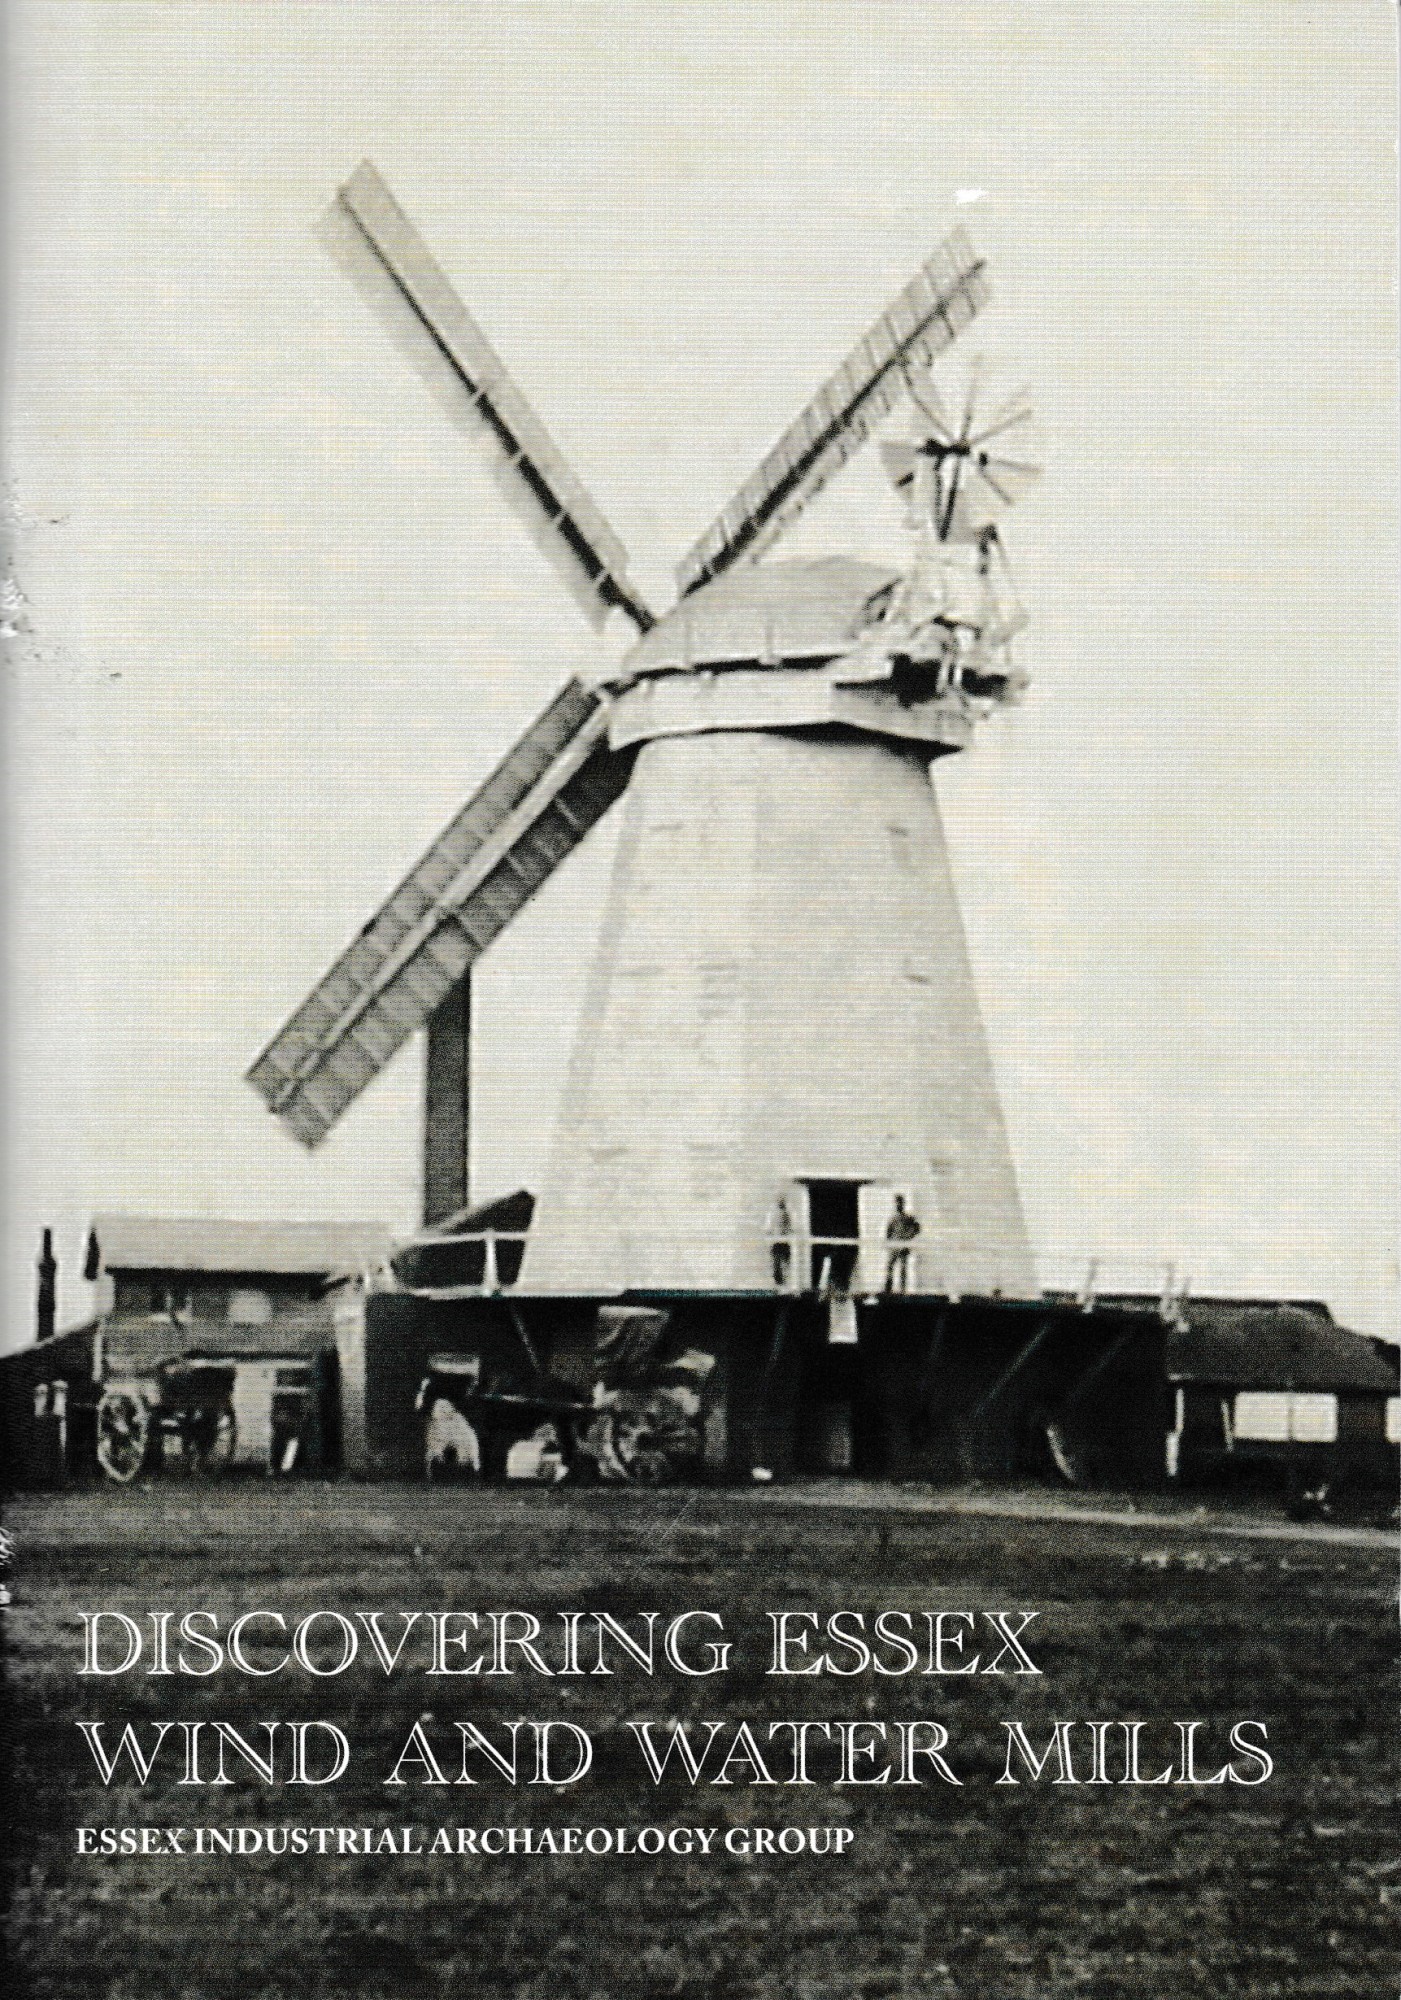 Discovering Essex Wind and Water Mills eiag illustration 1